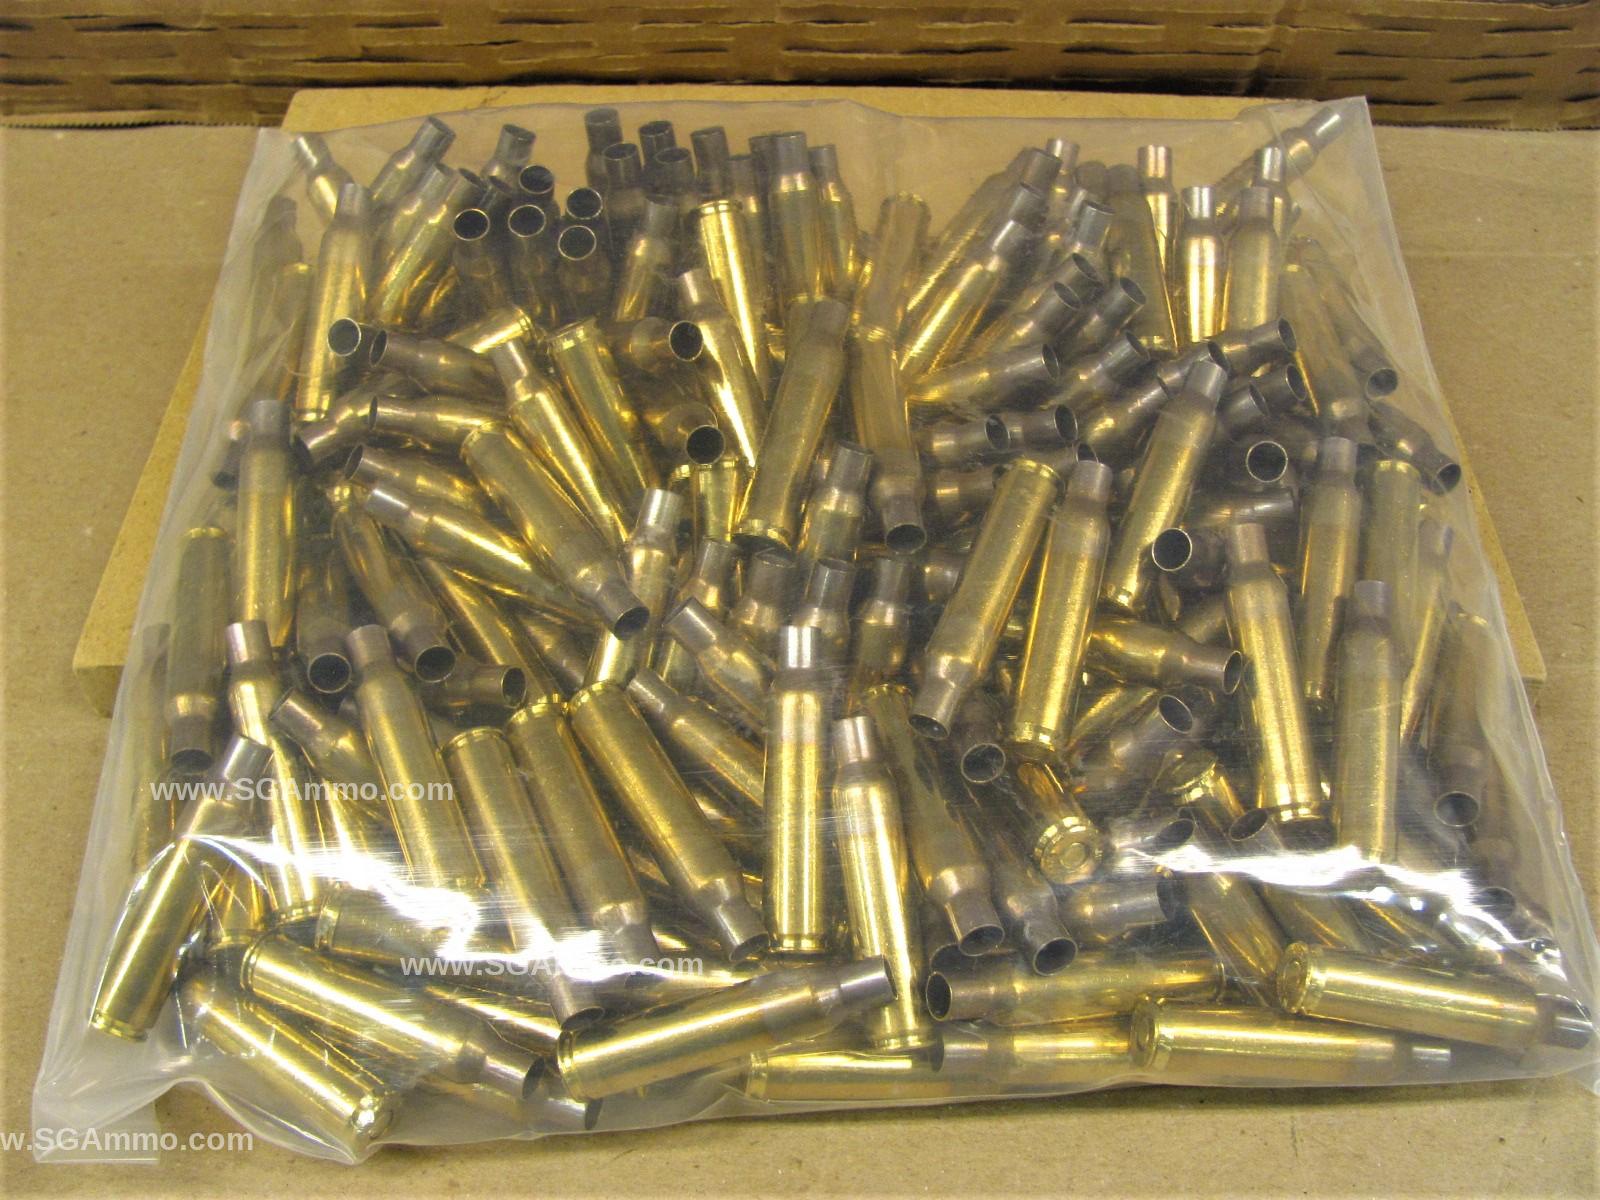 200 Round Pack - 6.5x52 Carcano Primed Brass For Handloading by Prvi  Partizan - Primed Brass Only - Not Loaded Ammo